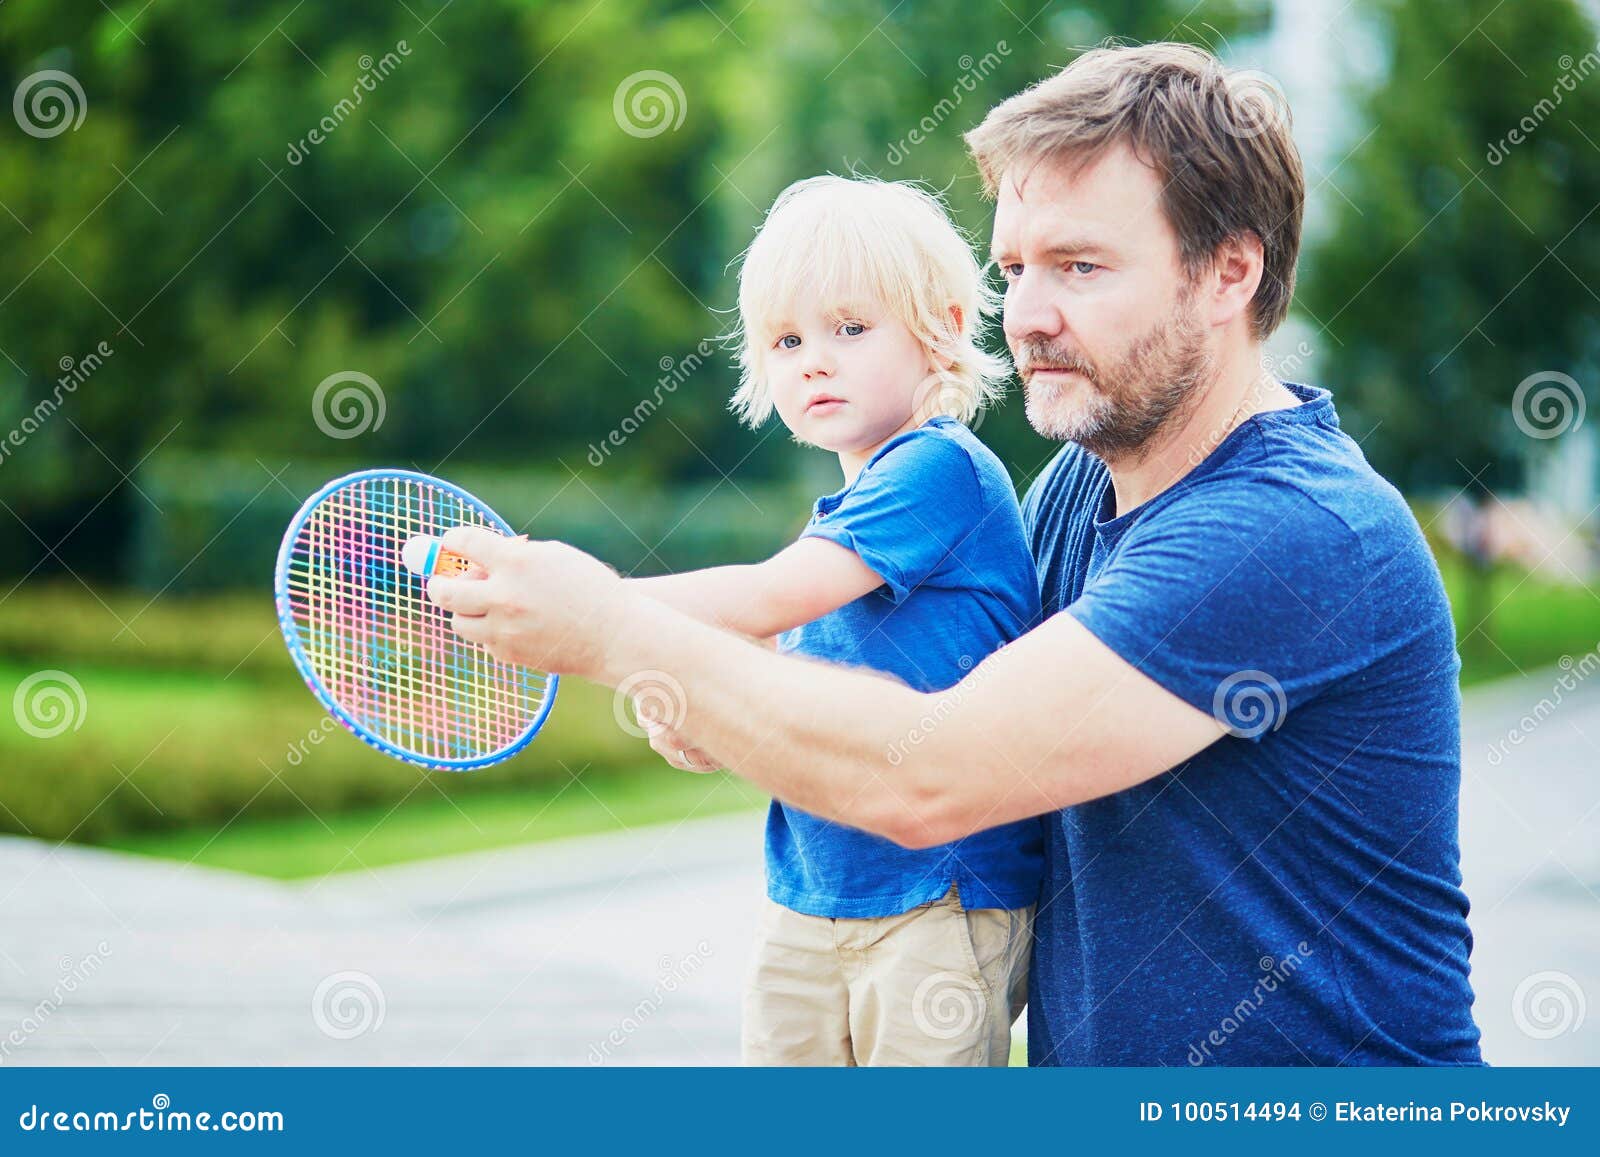 Little Boy Playing Badminton With Dad On The Playground ...